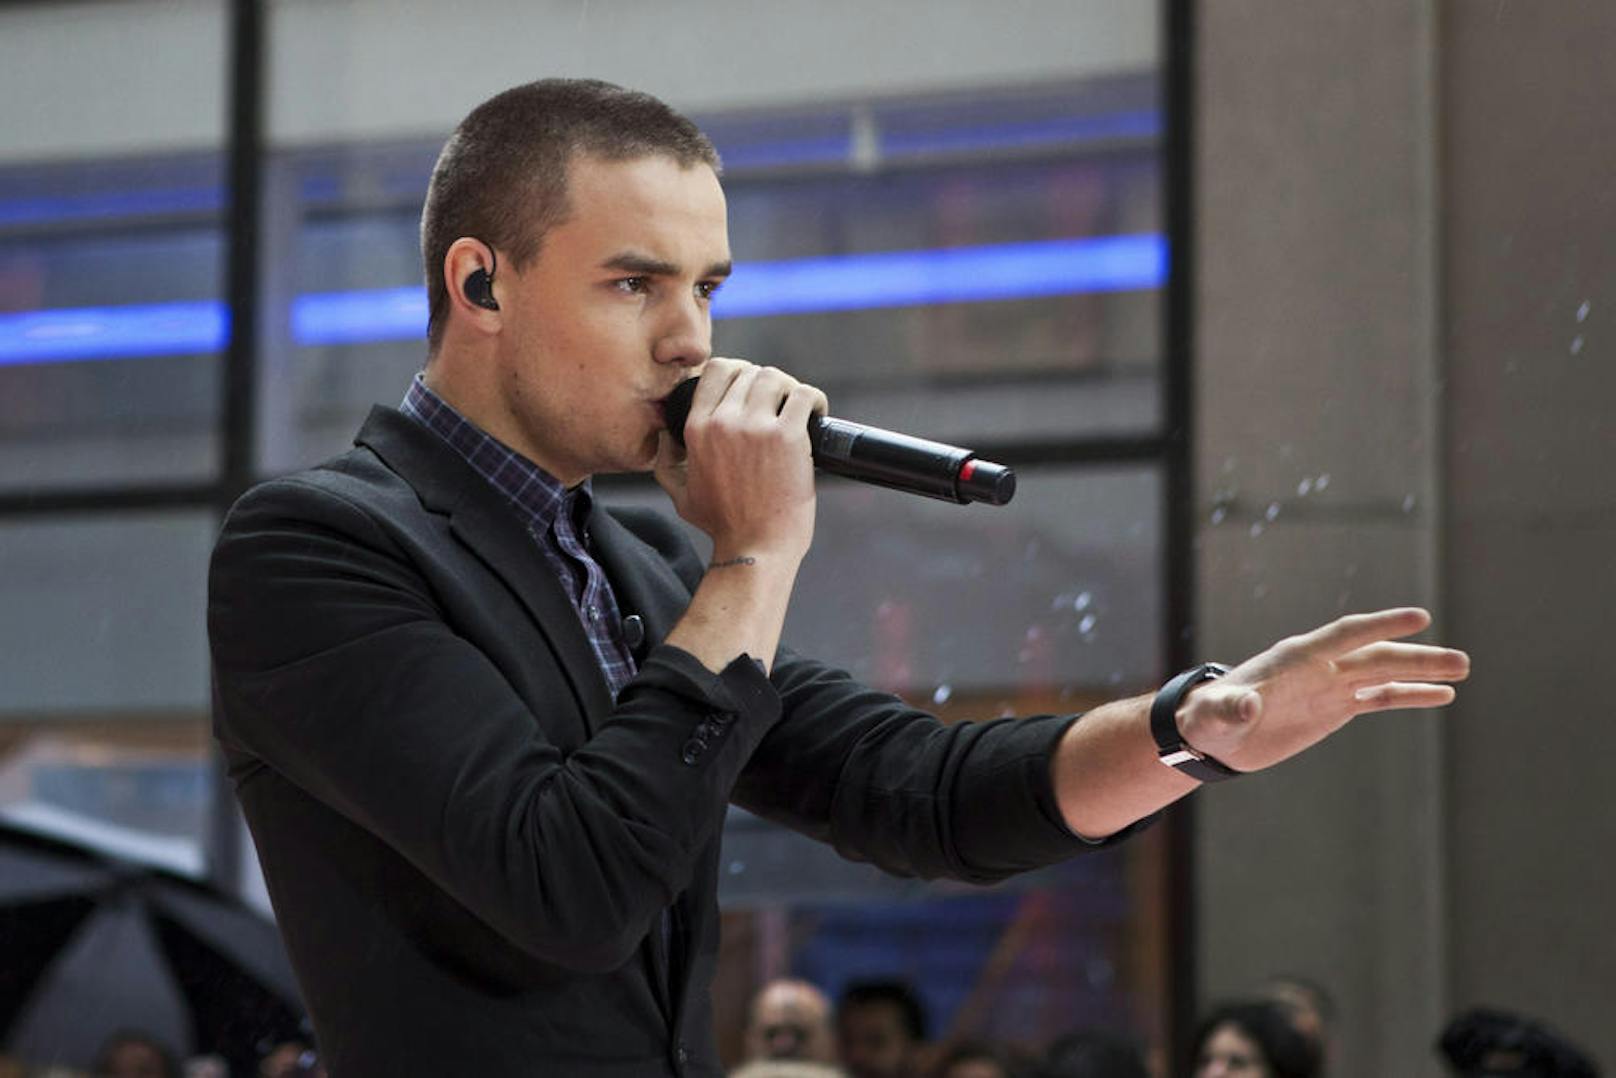 Liam Payne performt mit "One Direction" bei NBC's Today Show in New York, 2012.